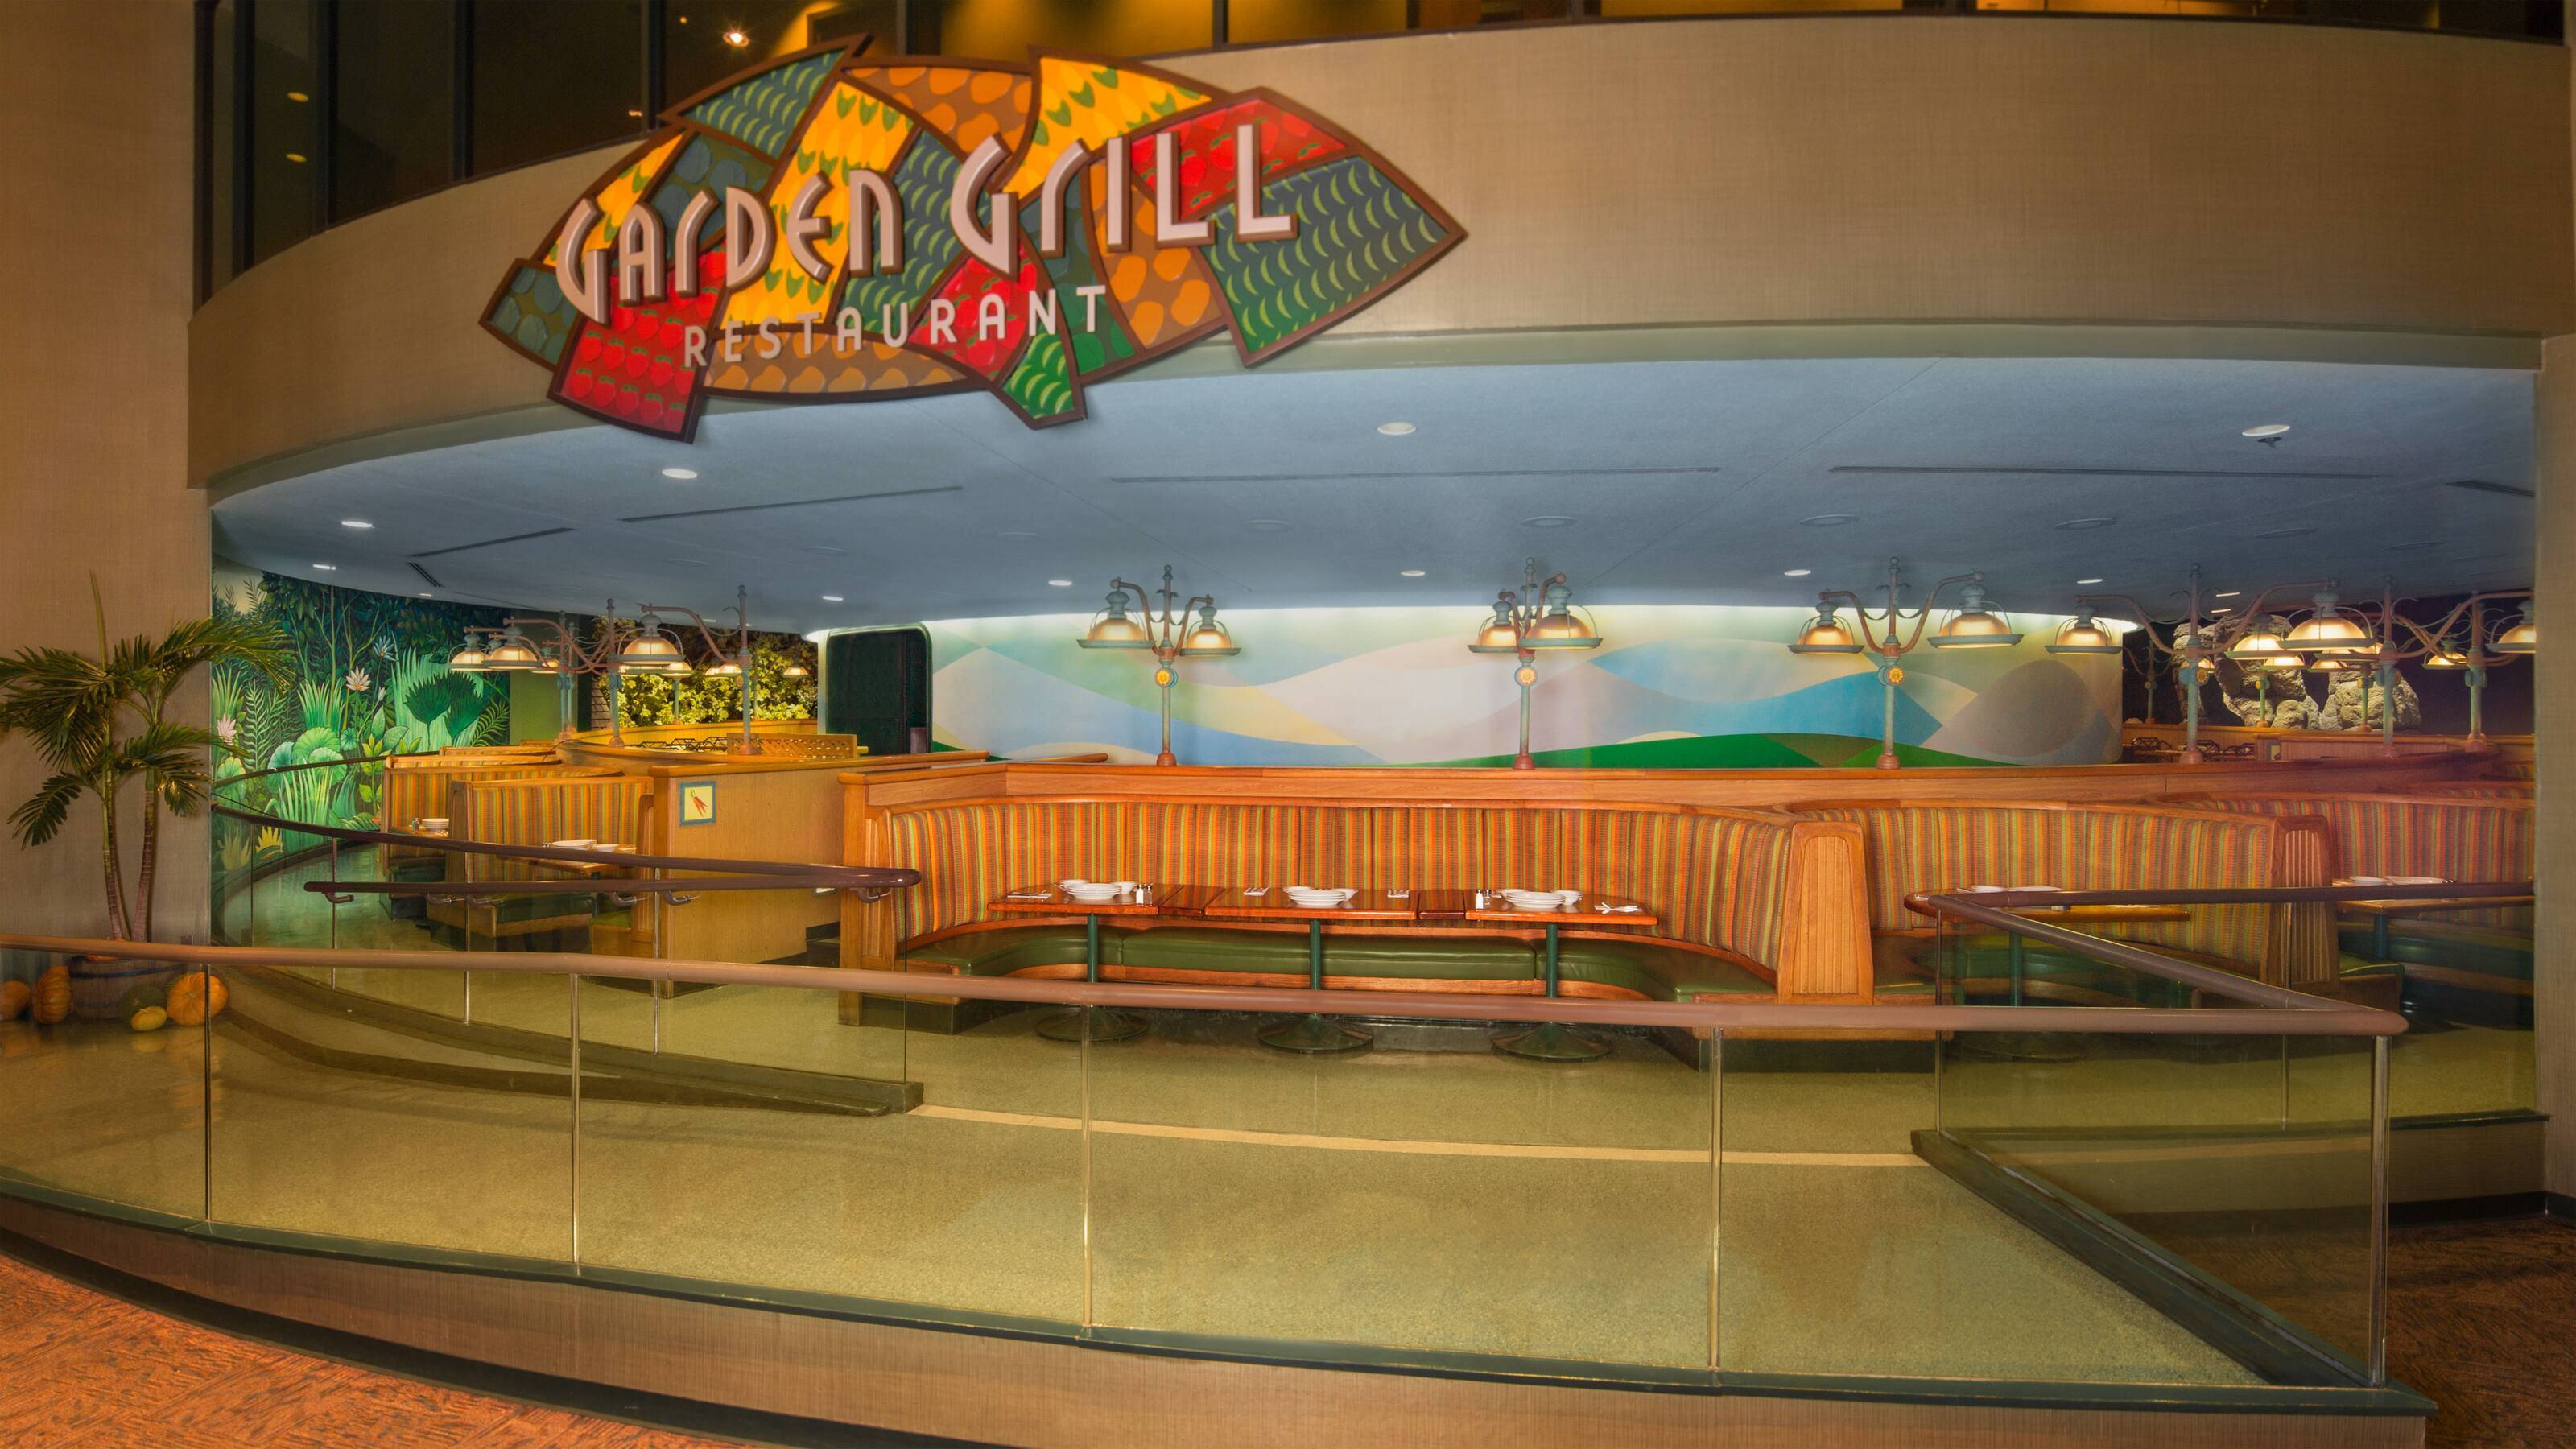 Full menu and pricing now available for the return of breakfast at The Garden Grill in EPCOT